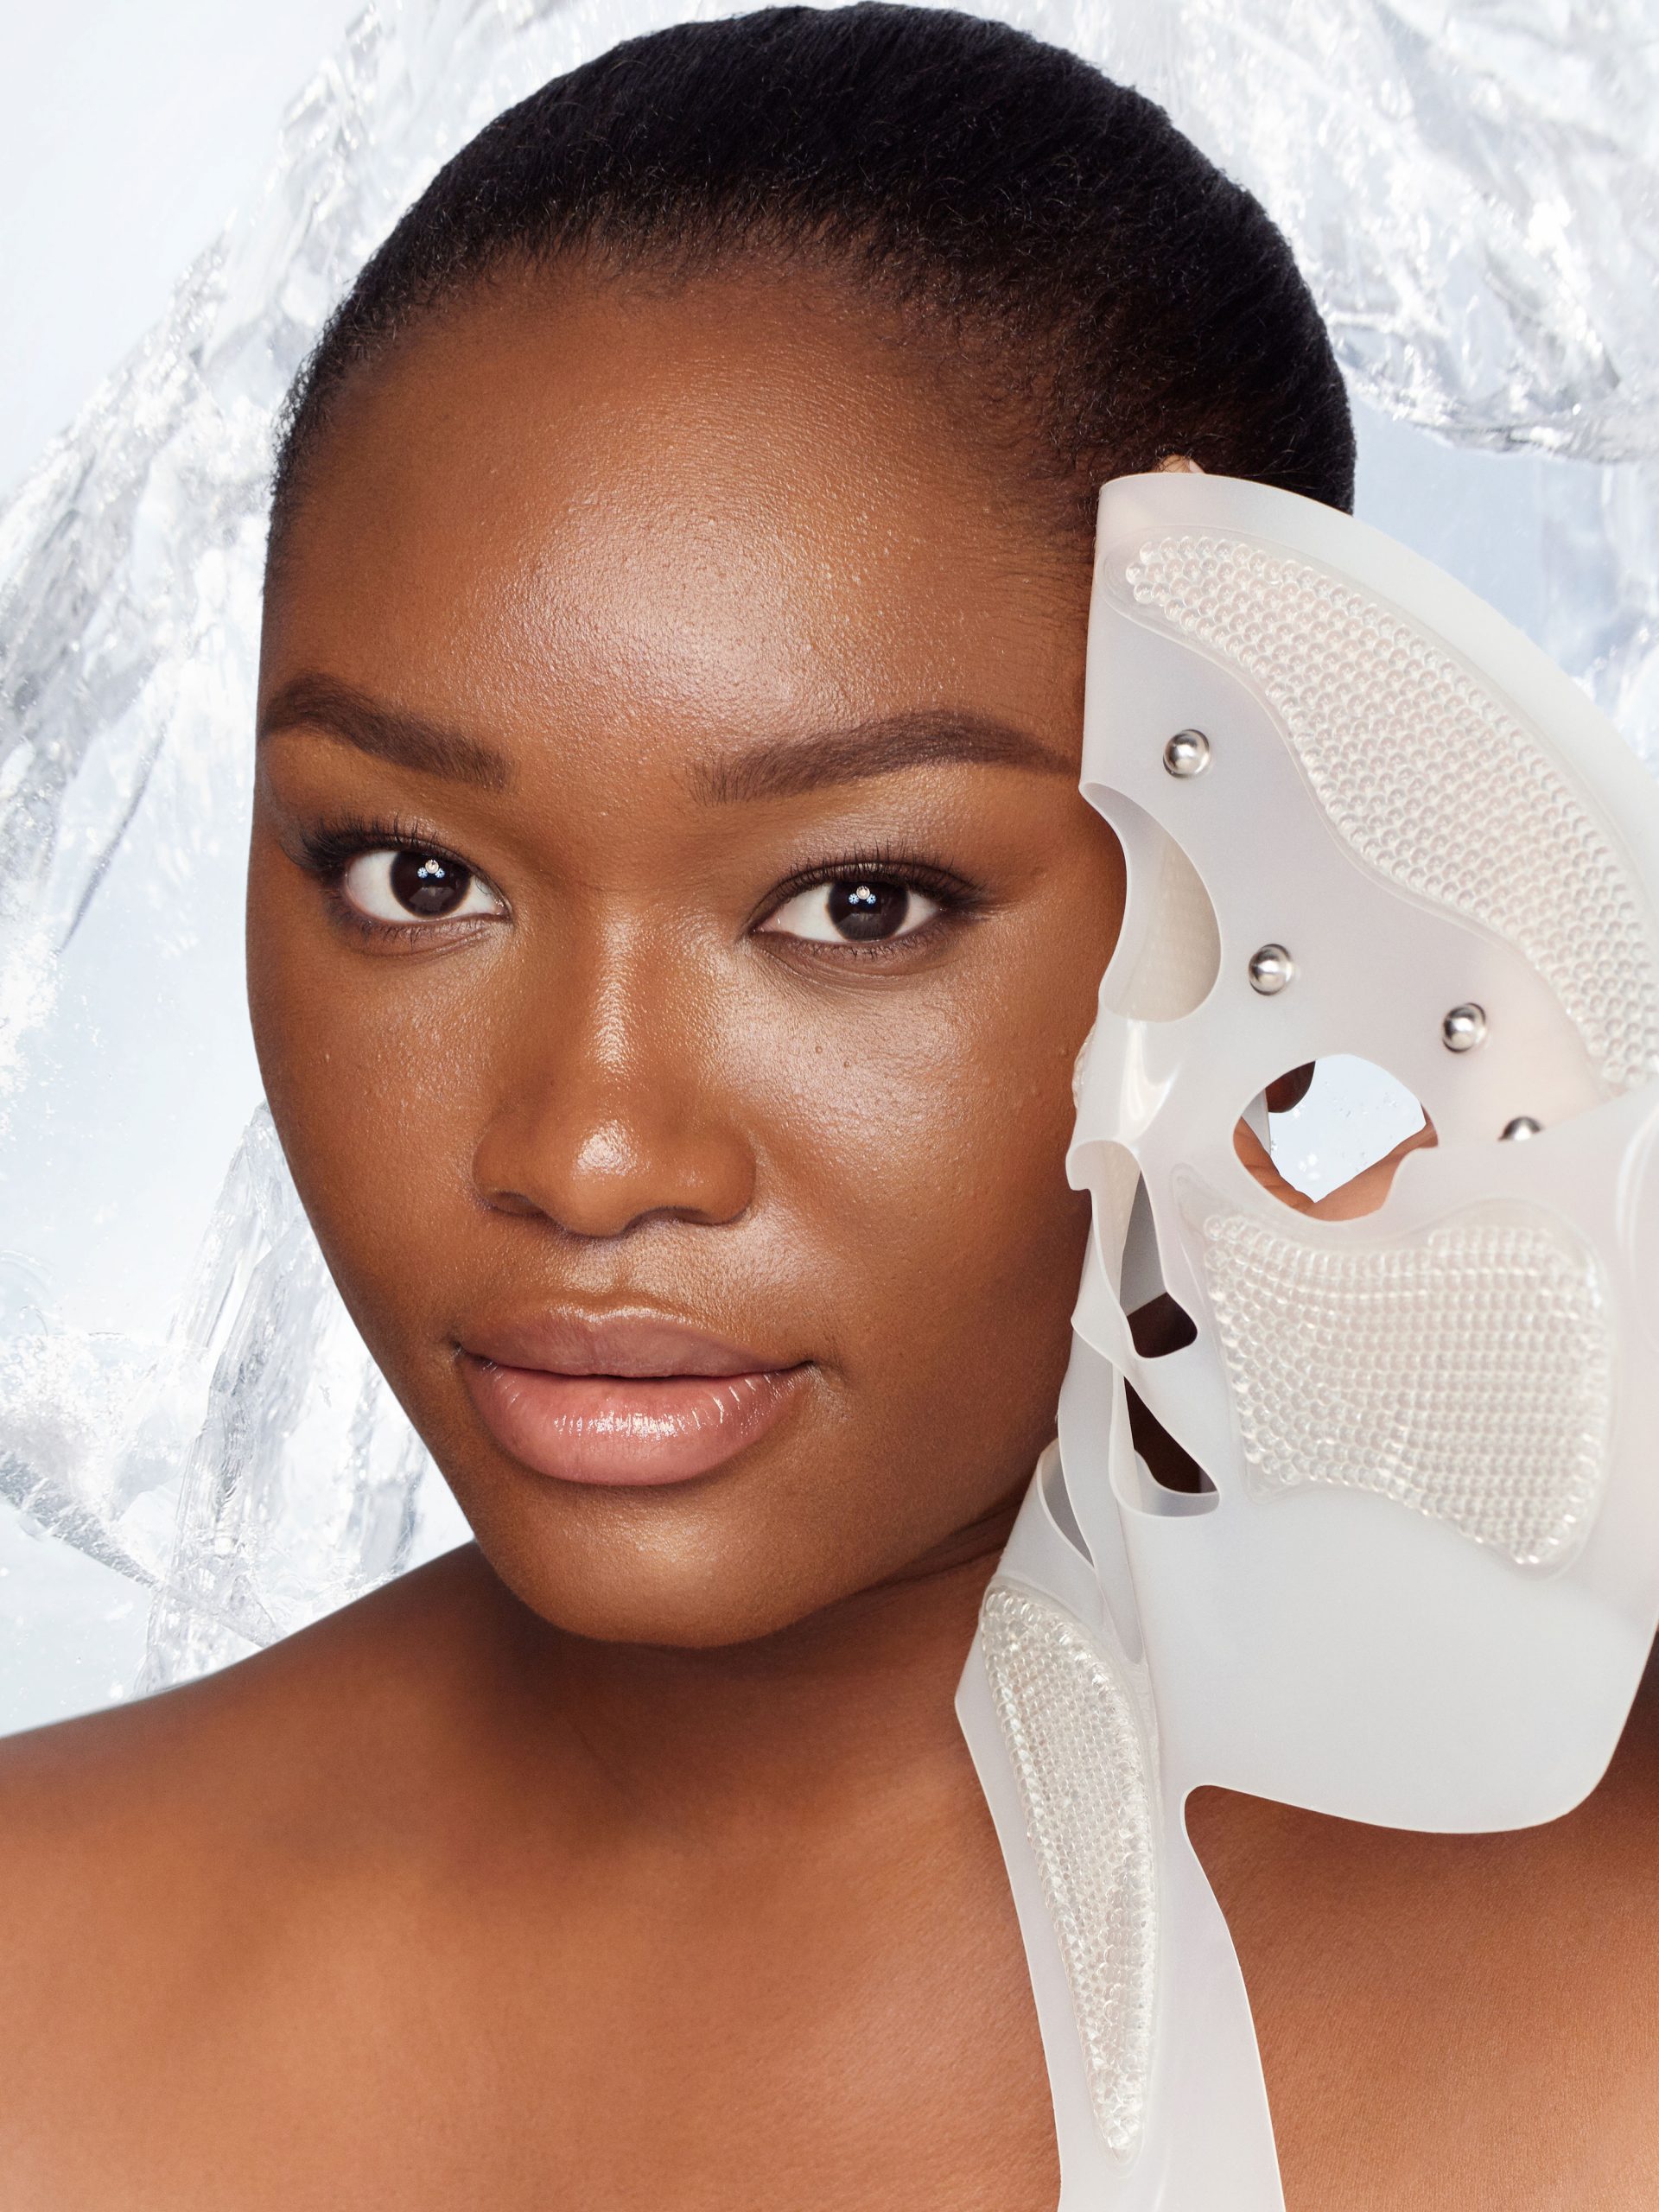 Charlotte Tilbury Cryotherapy-Inspired Skincare + More Beauty News